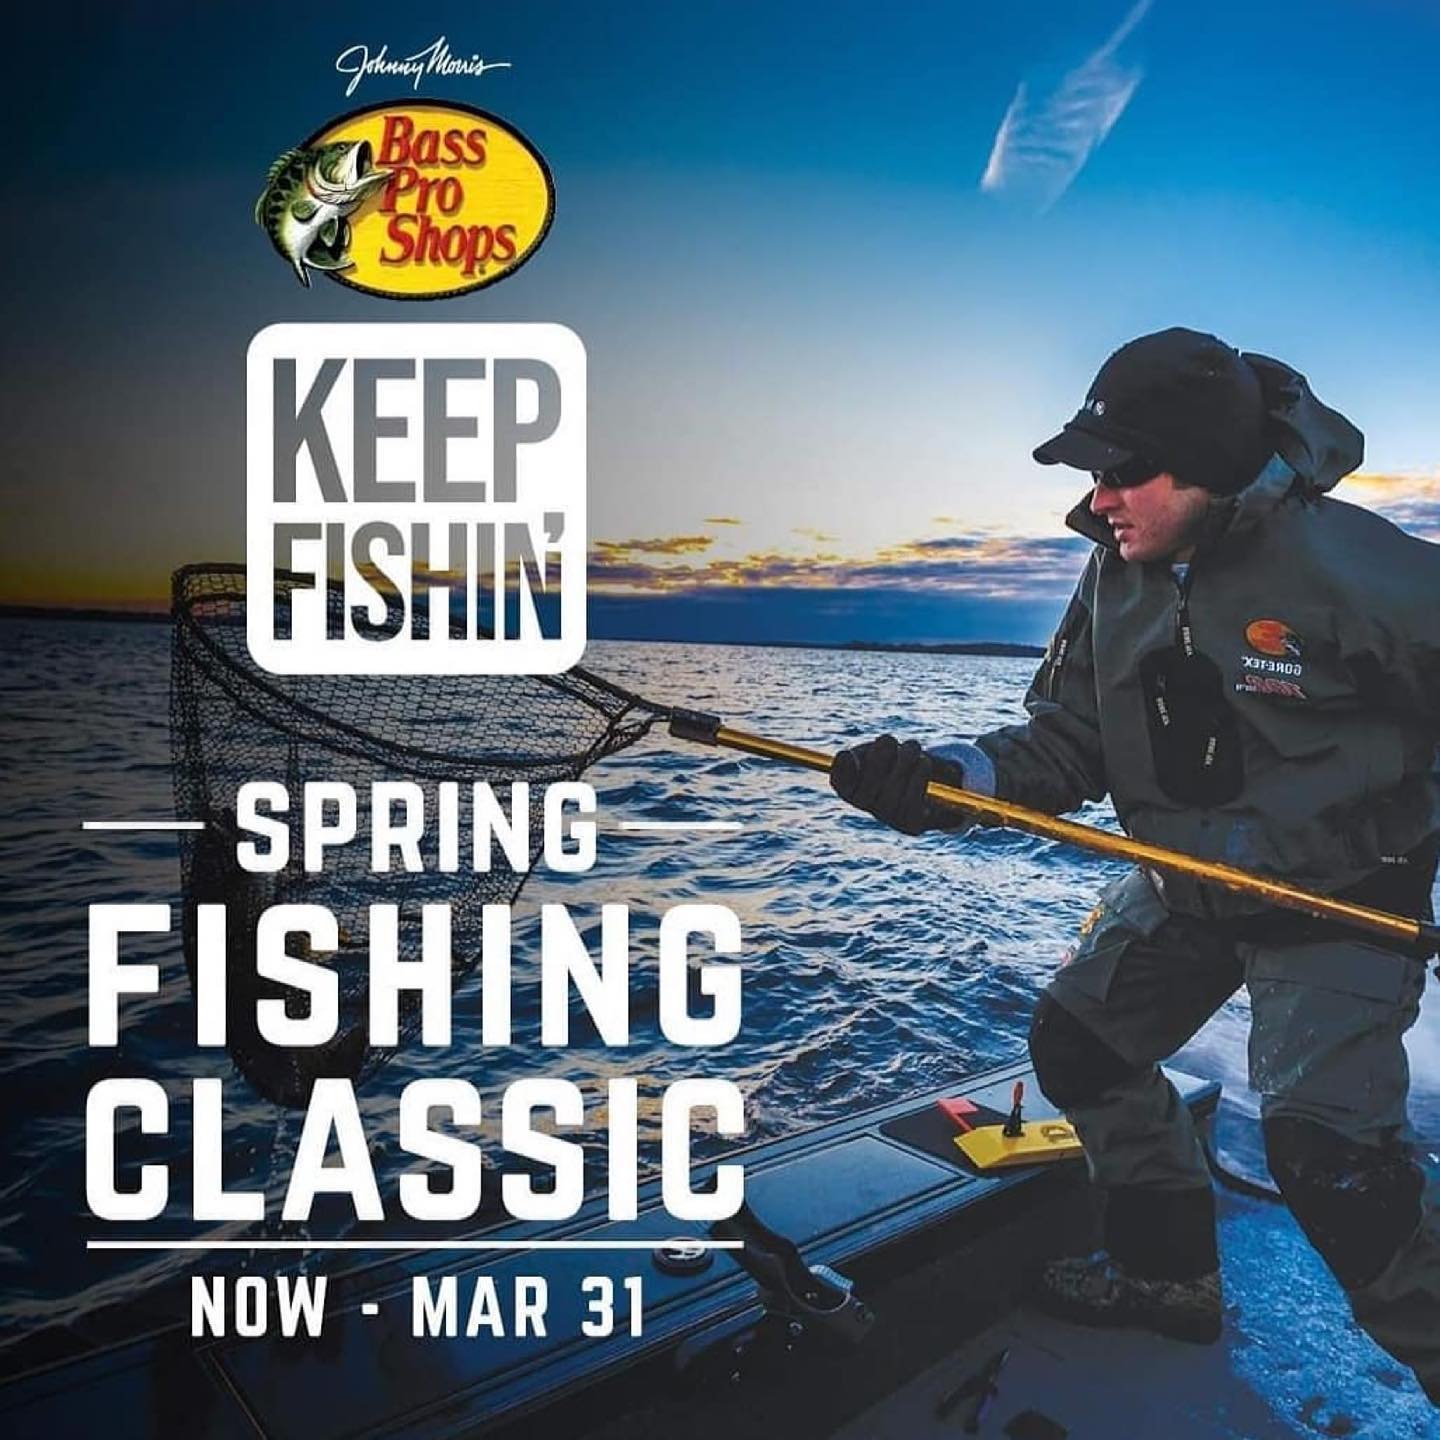 Bass Pro Shops and Cabela's inspiring families to “Keep Fishin'” with the  largest annual fishing event - Americana Outdoors